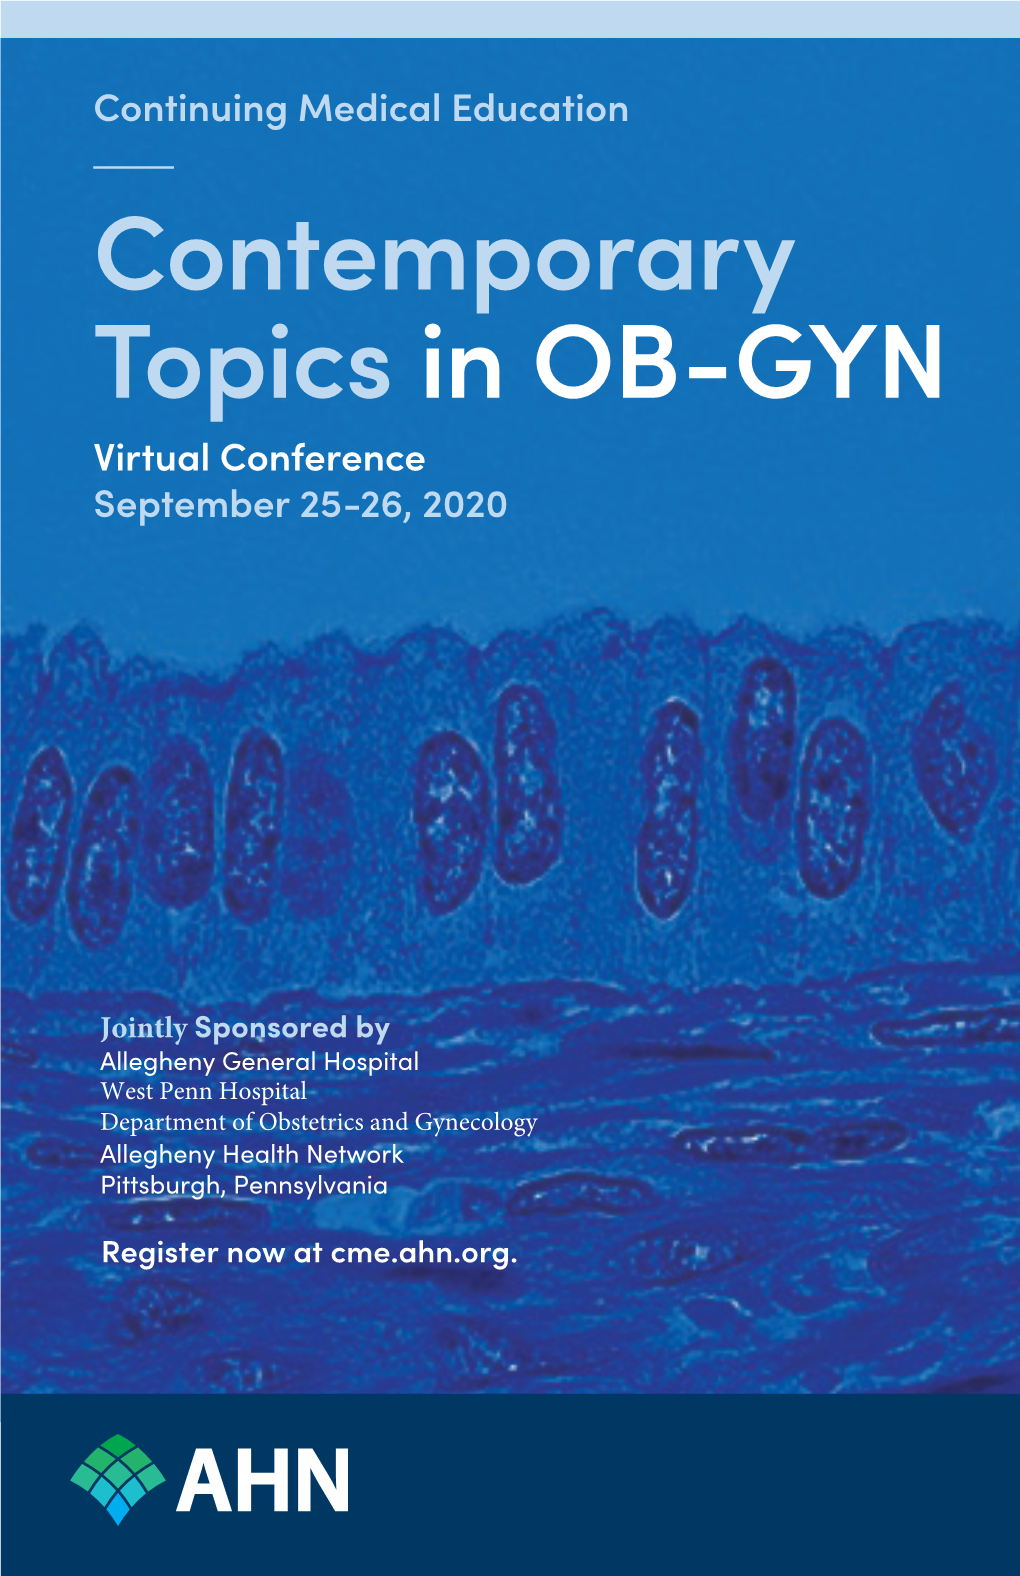 Contemporary Topics in OB-GYN Virtual Conference September 25-26, 2020